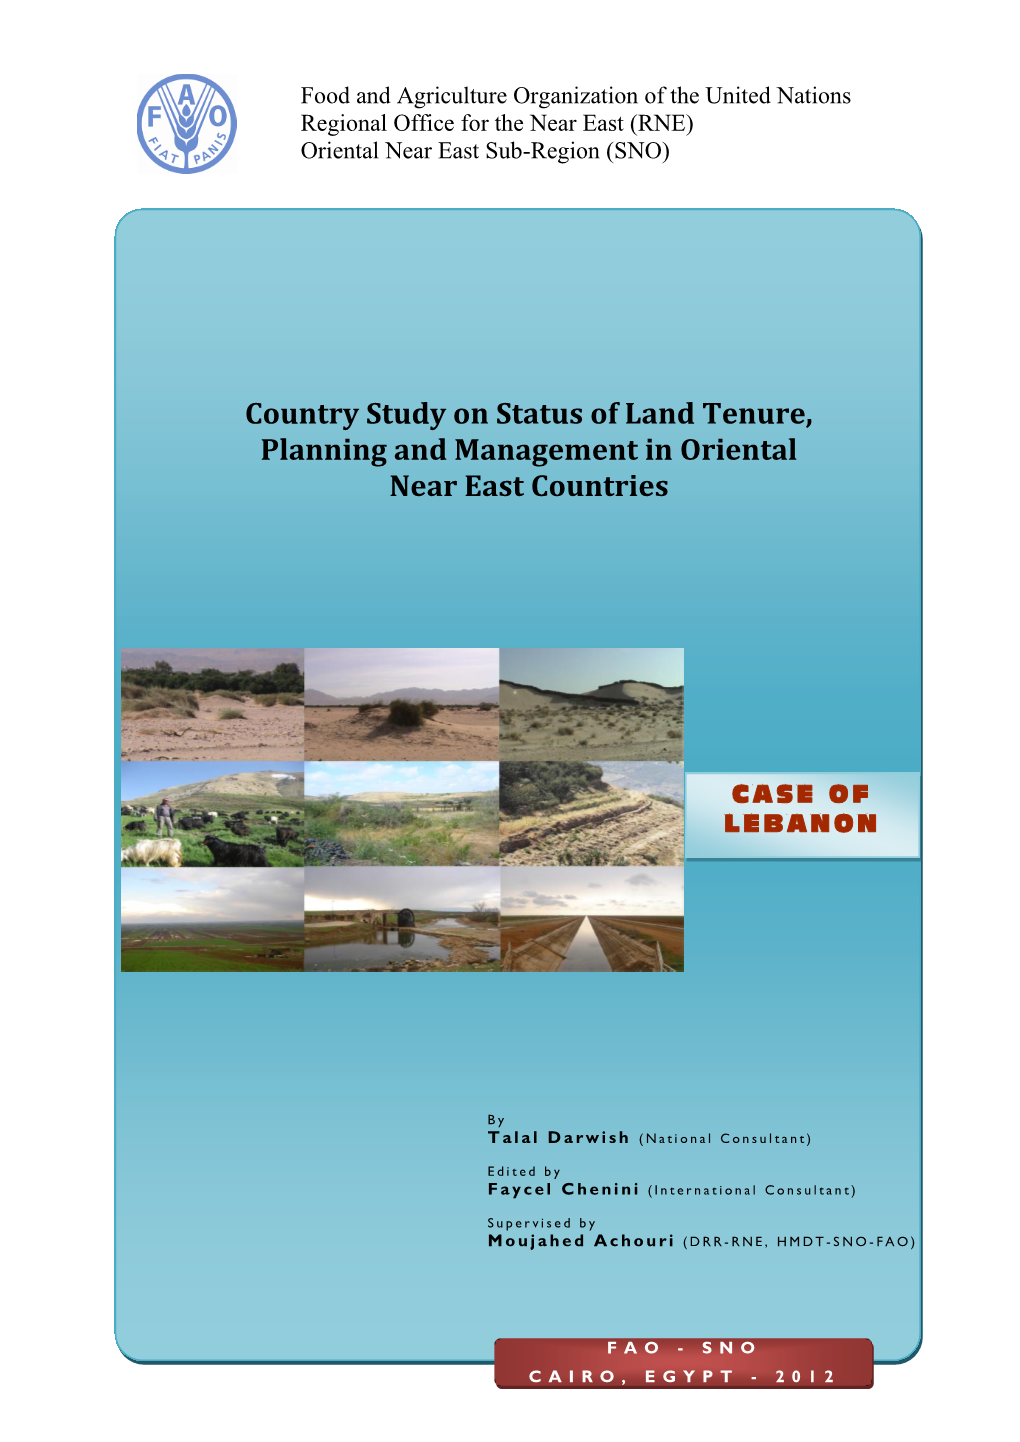 Country Study on Status of Land Tenure, Planning and Management in Oriental Near East Countries